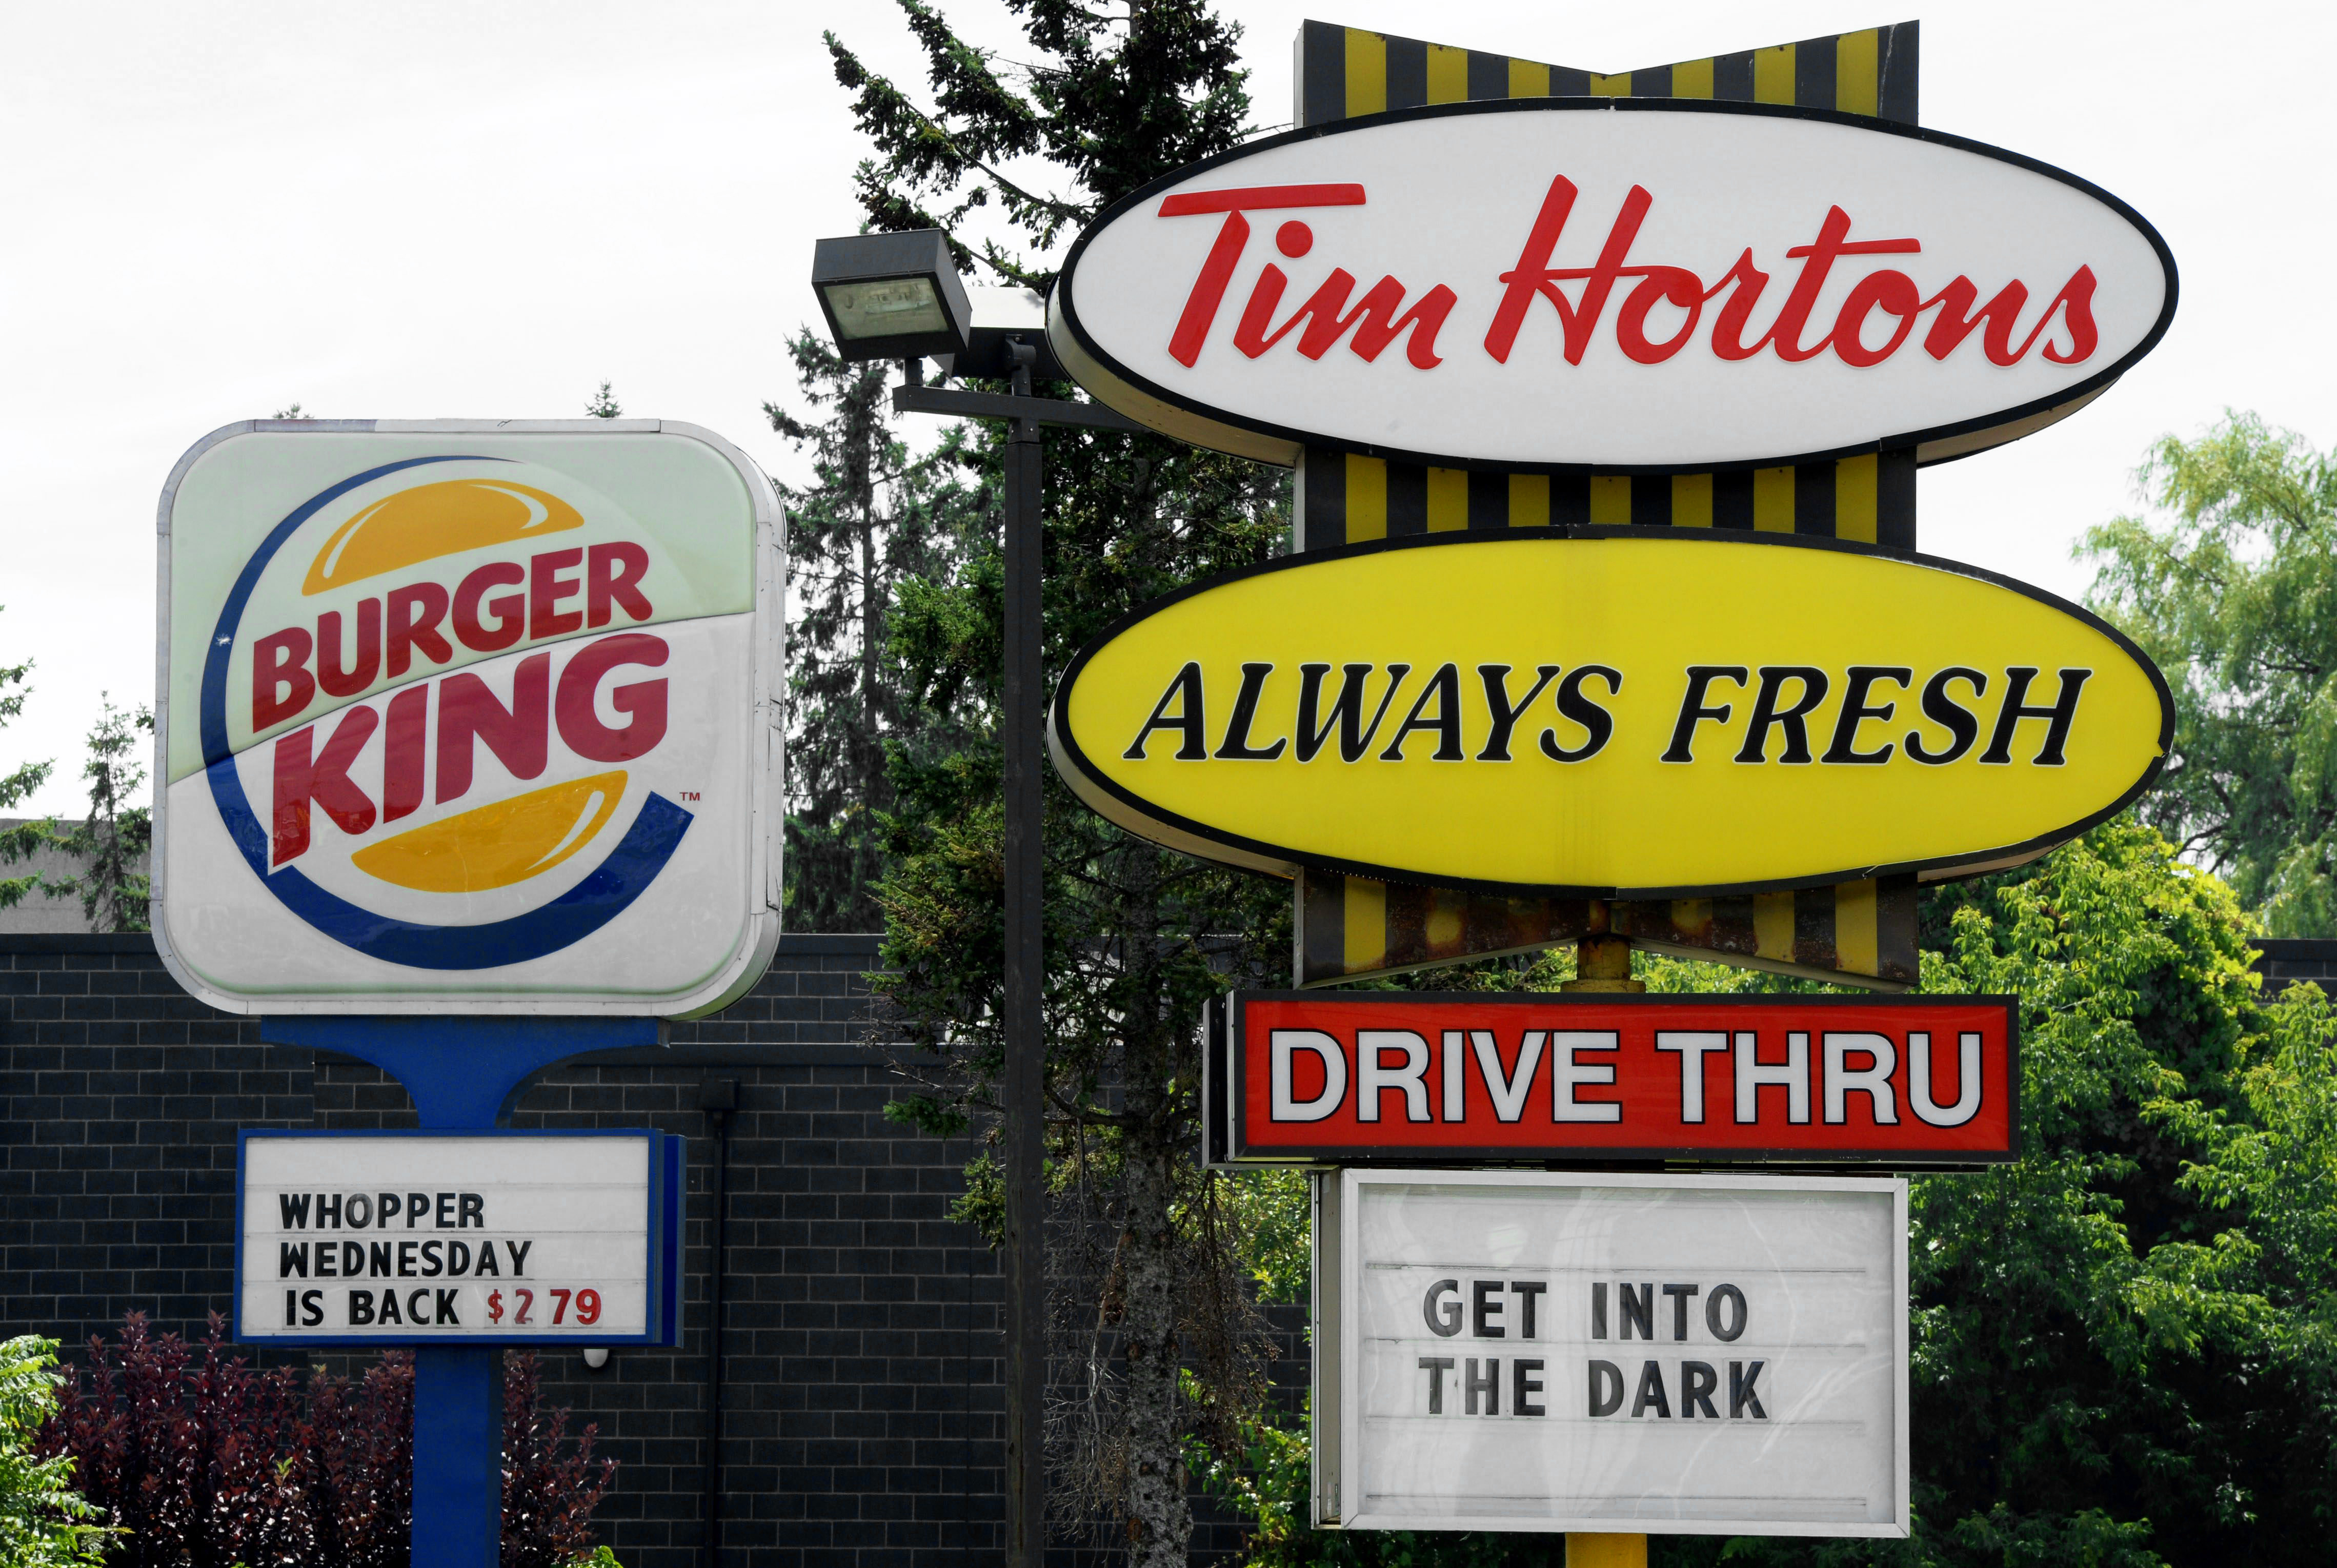 A Burger King sign and a Tim Hortons sign are displayed on St. Laurent Boulevard in Ottawa, Canada on Aug. 25, 2014. 